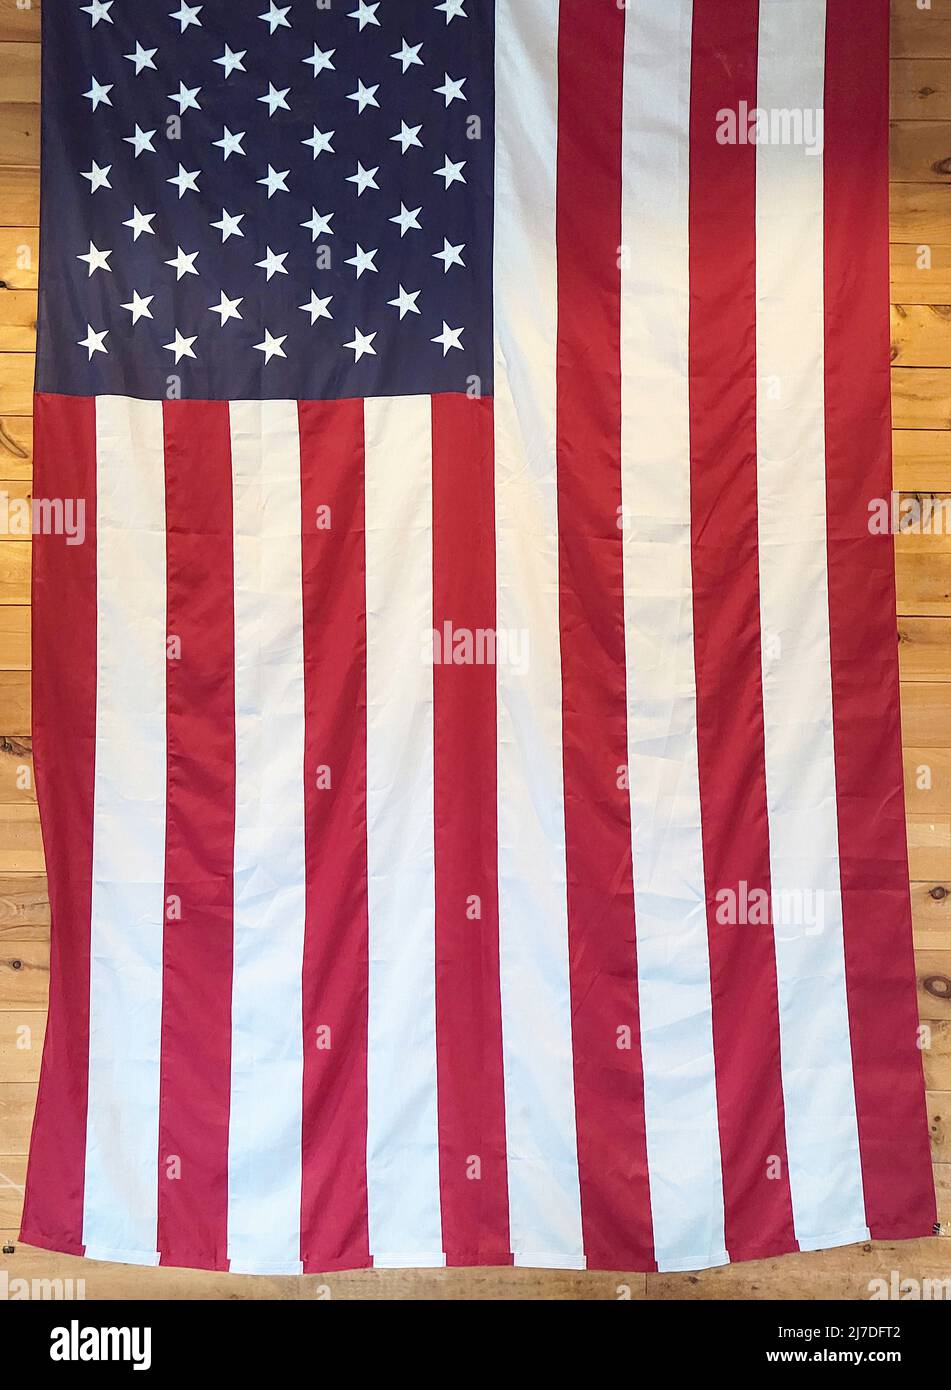 American flag hanging on a wooden wall Stock Photo